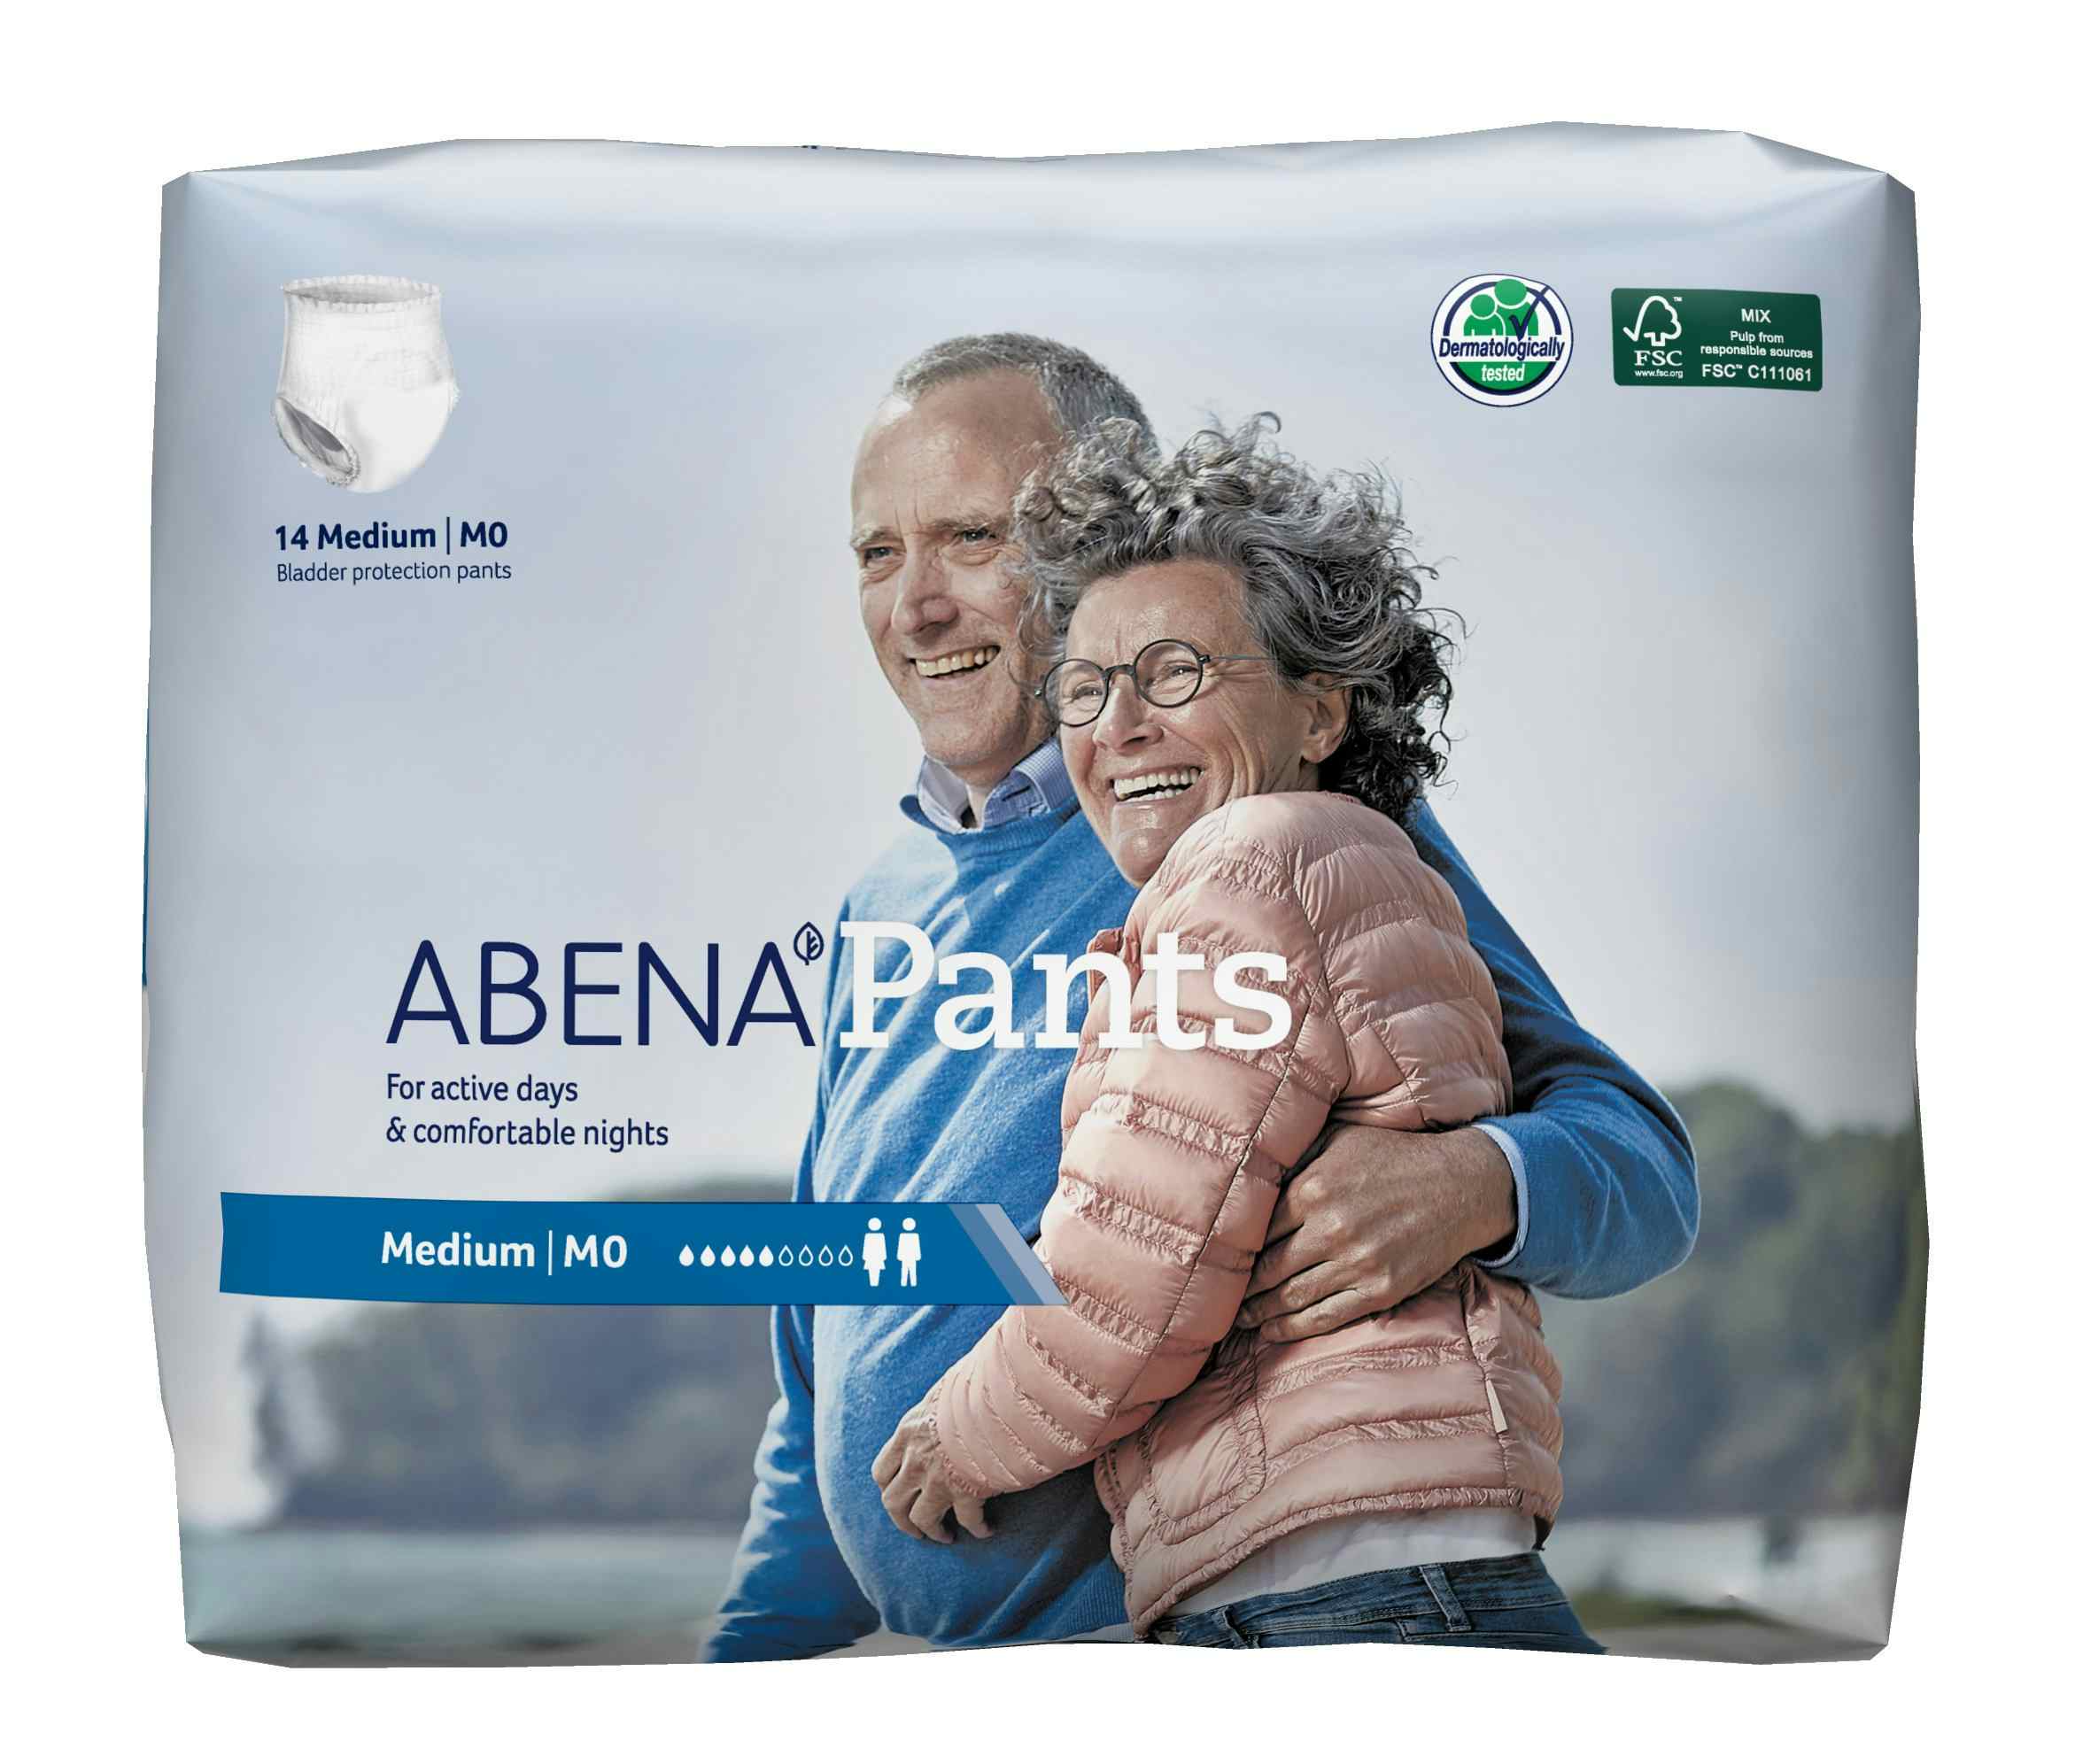 Abena Unisex Disposable Pull On Adult Diaper with Tear Away Seams, Moderate Absorbency, 1000017173, Medium (31-43") - Case of 84 Diapers (6 Bags)